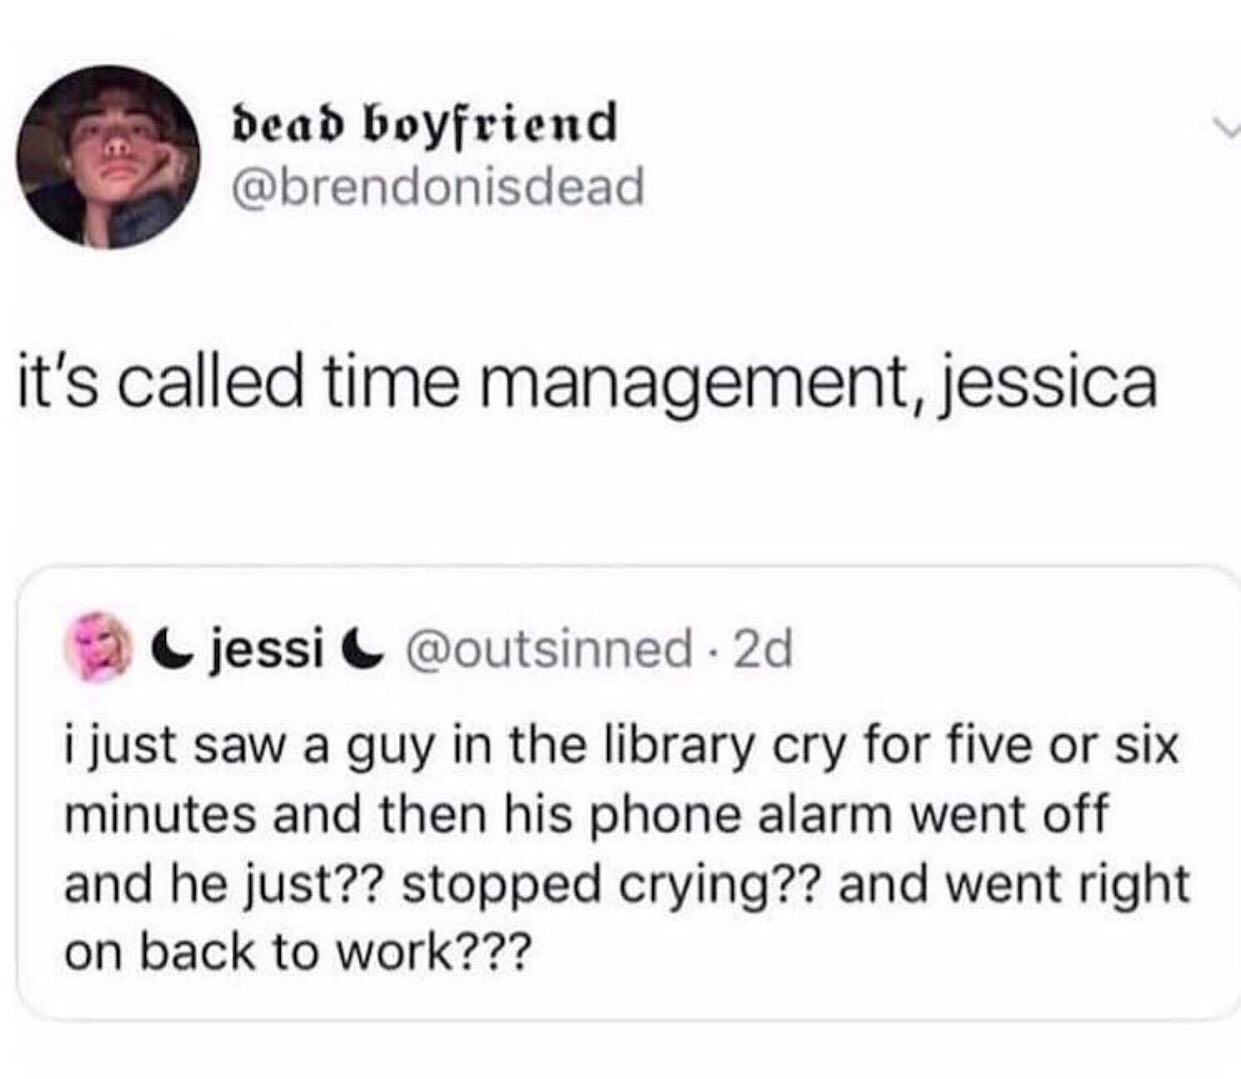 college memes - joe rogan pepe - dead boyfriend it's called time management, jessica 2 jessic 2d i just saw a guy in the library cry for five or six minutes and then his phone alarm went off and he just?? stopped crying?? and went right on back to work???